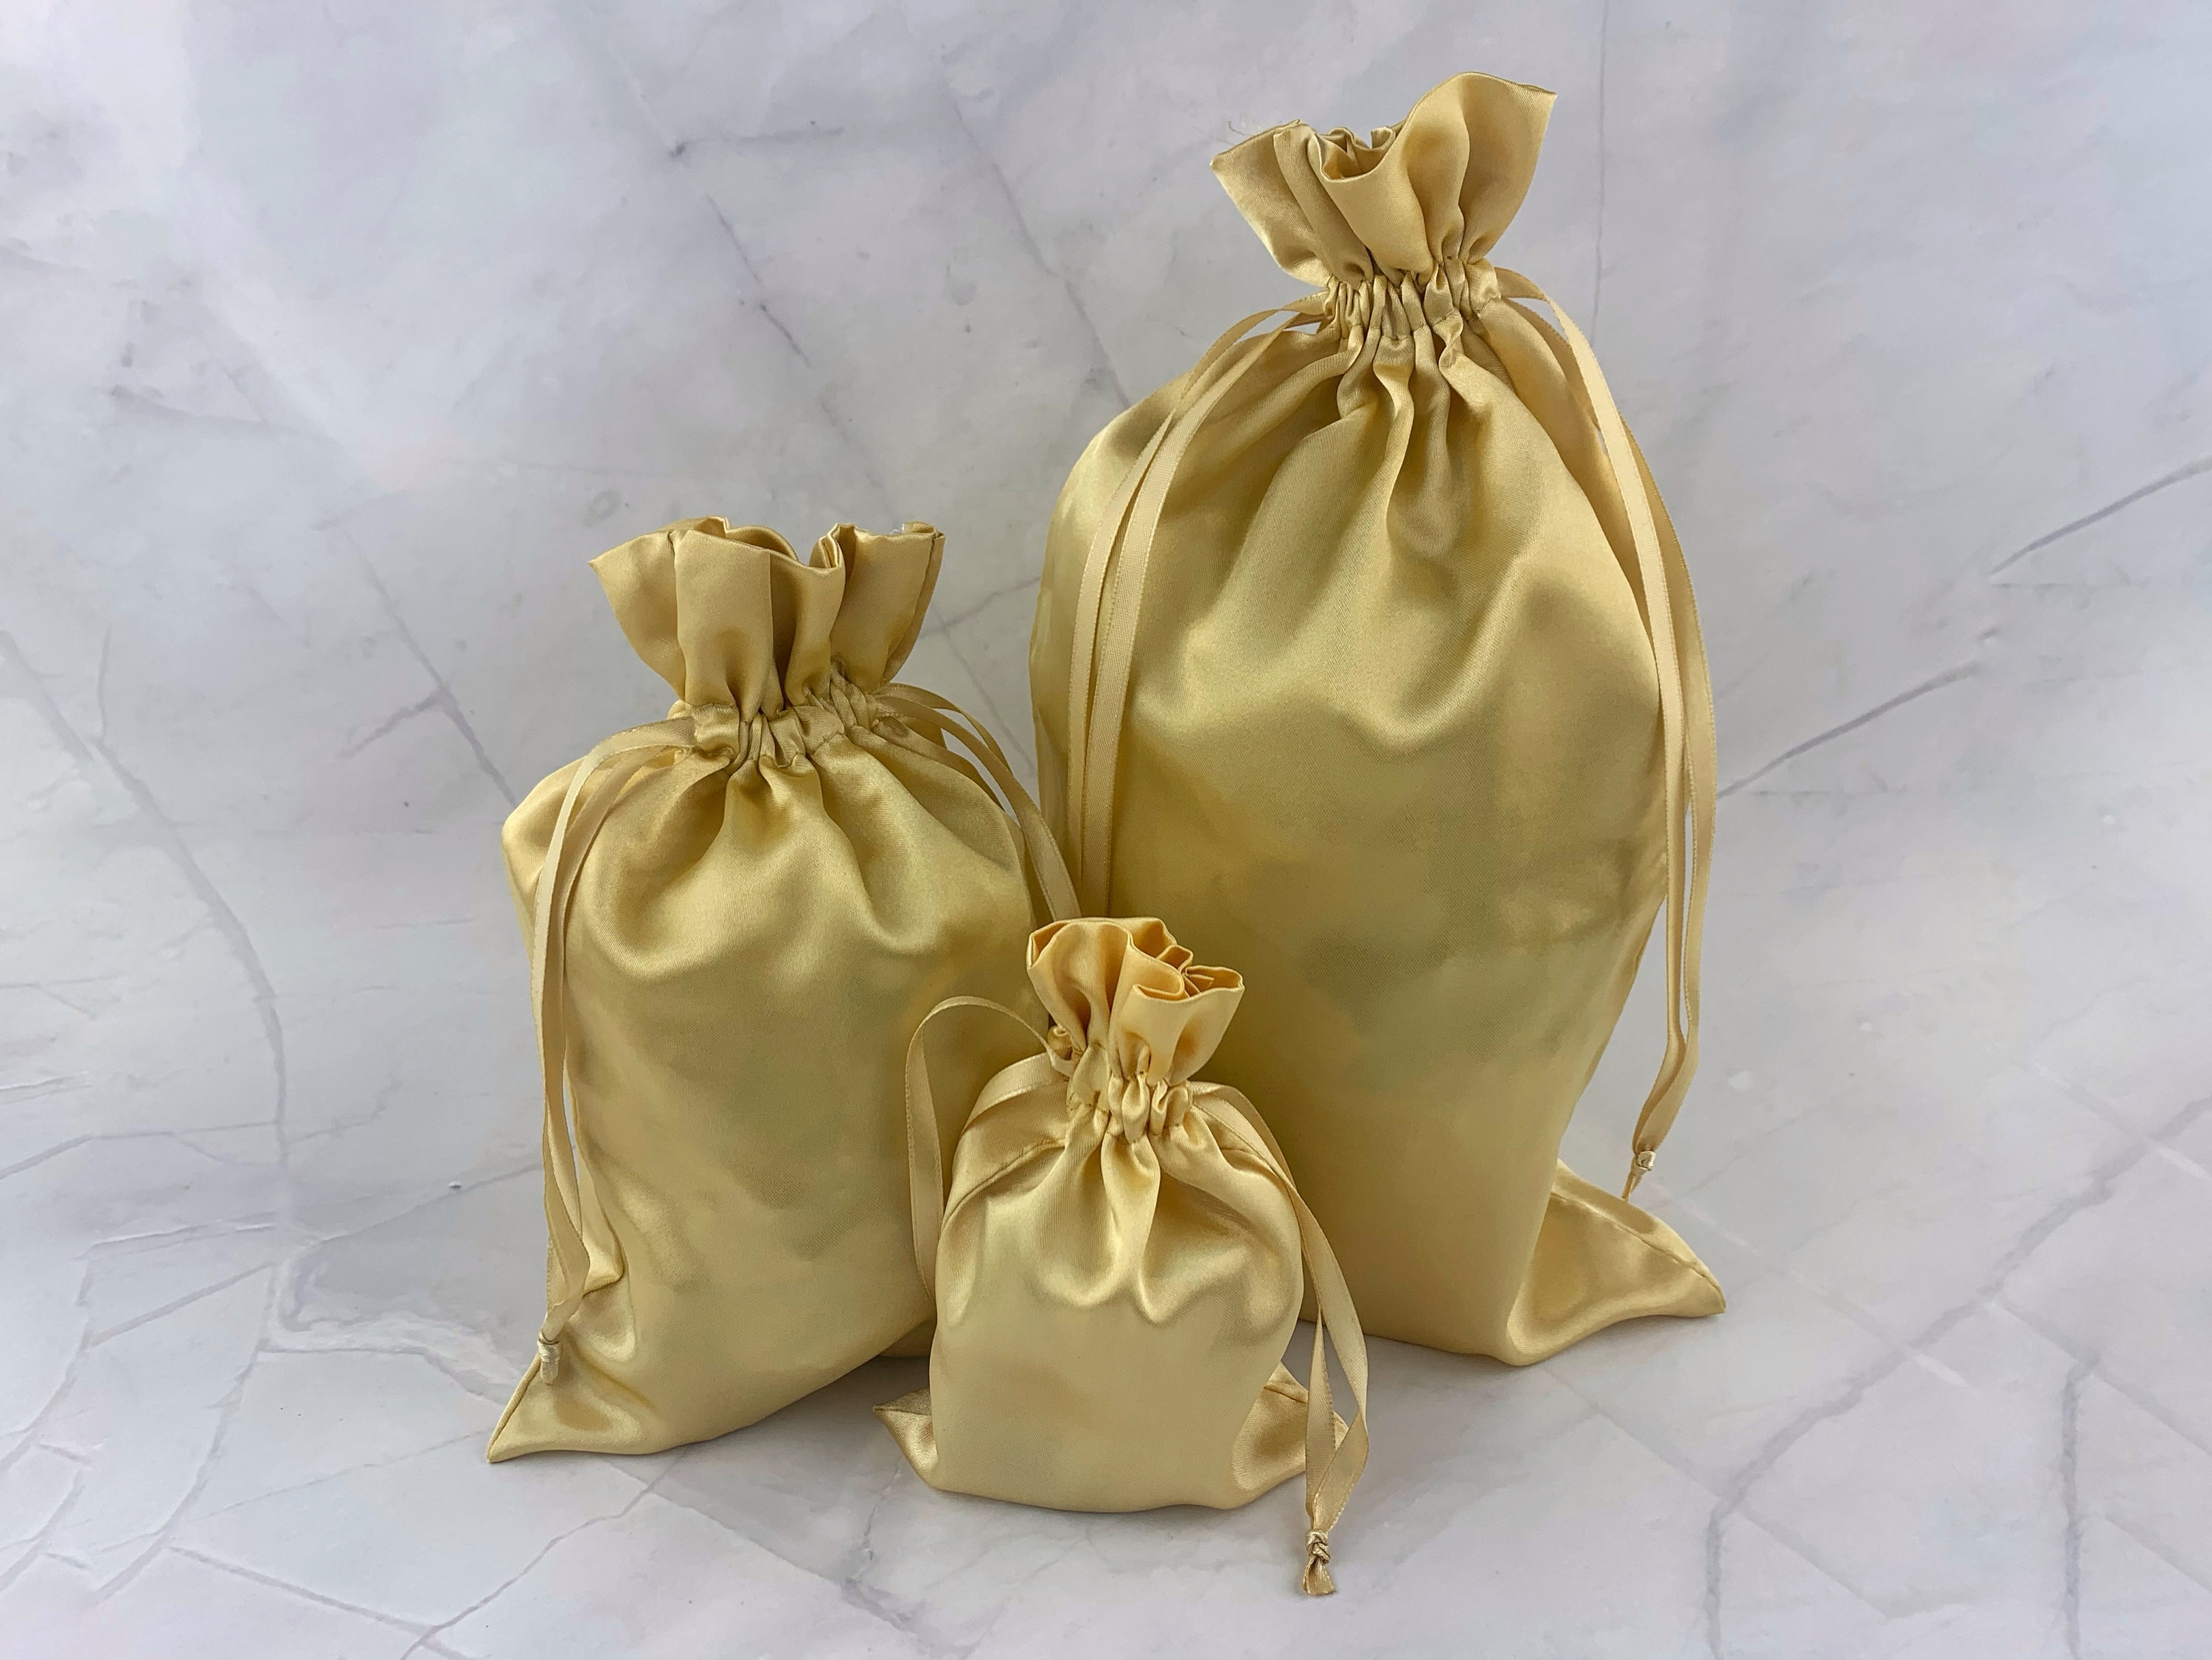 20 Black & Gold Monogram Birthday Party Favor Bags for Guests With